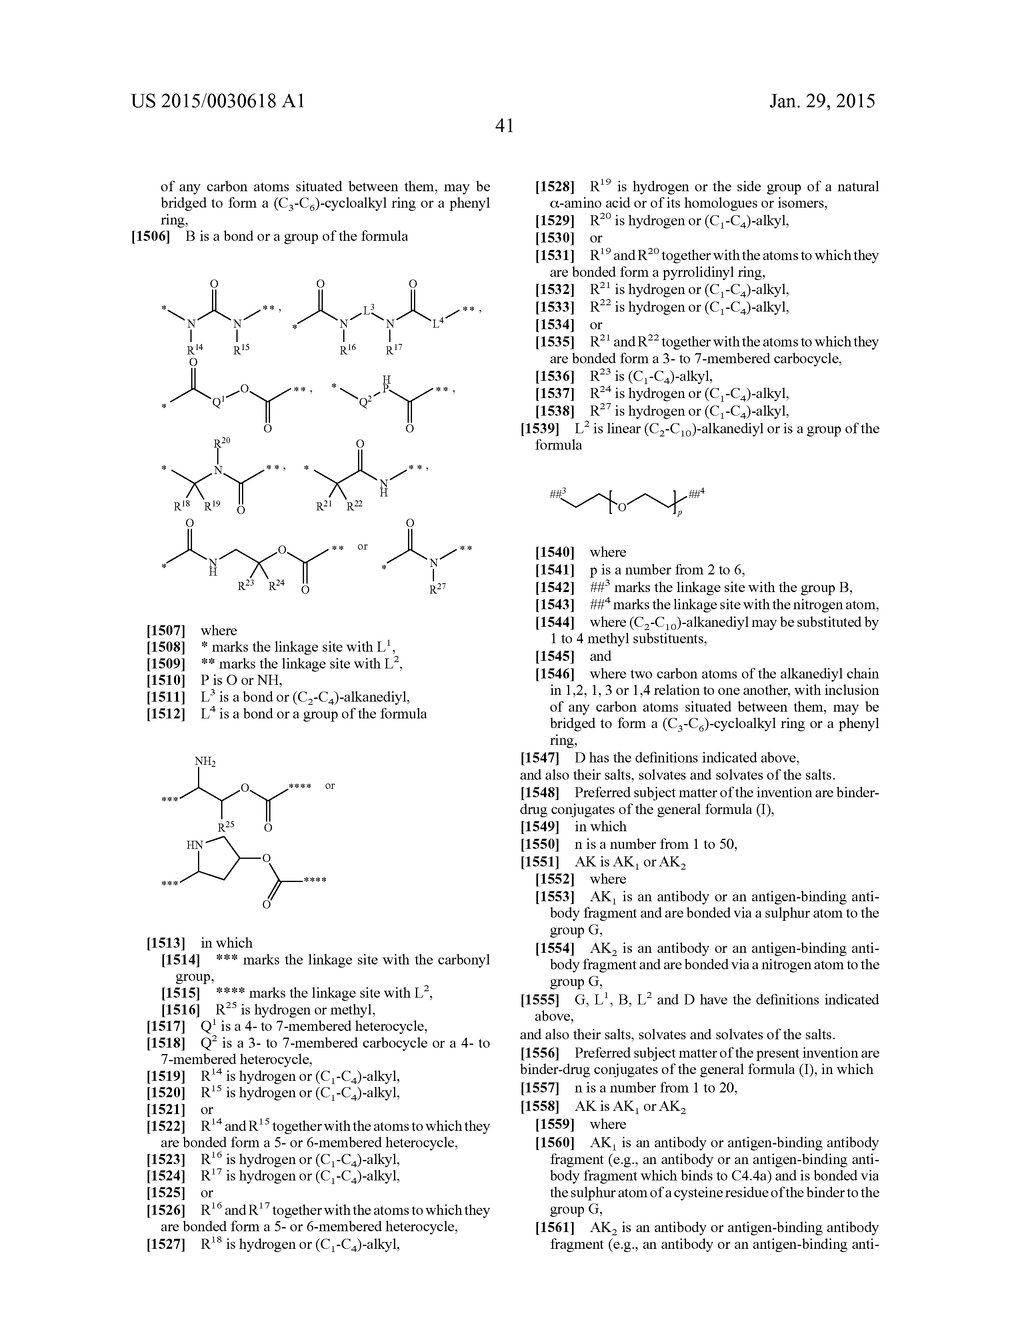 NOVEL BINDER-DRUG CONJUGATES (ADCS) AND USE THEREOF - diagram, schematic, and image 42